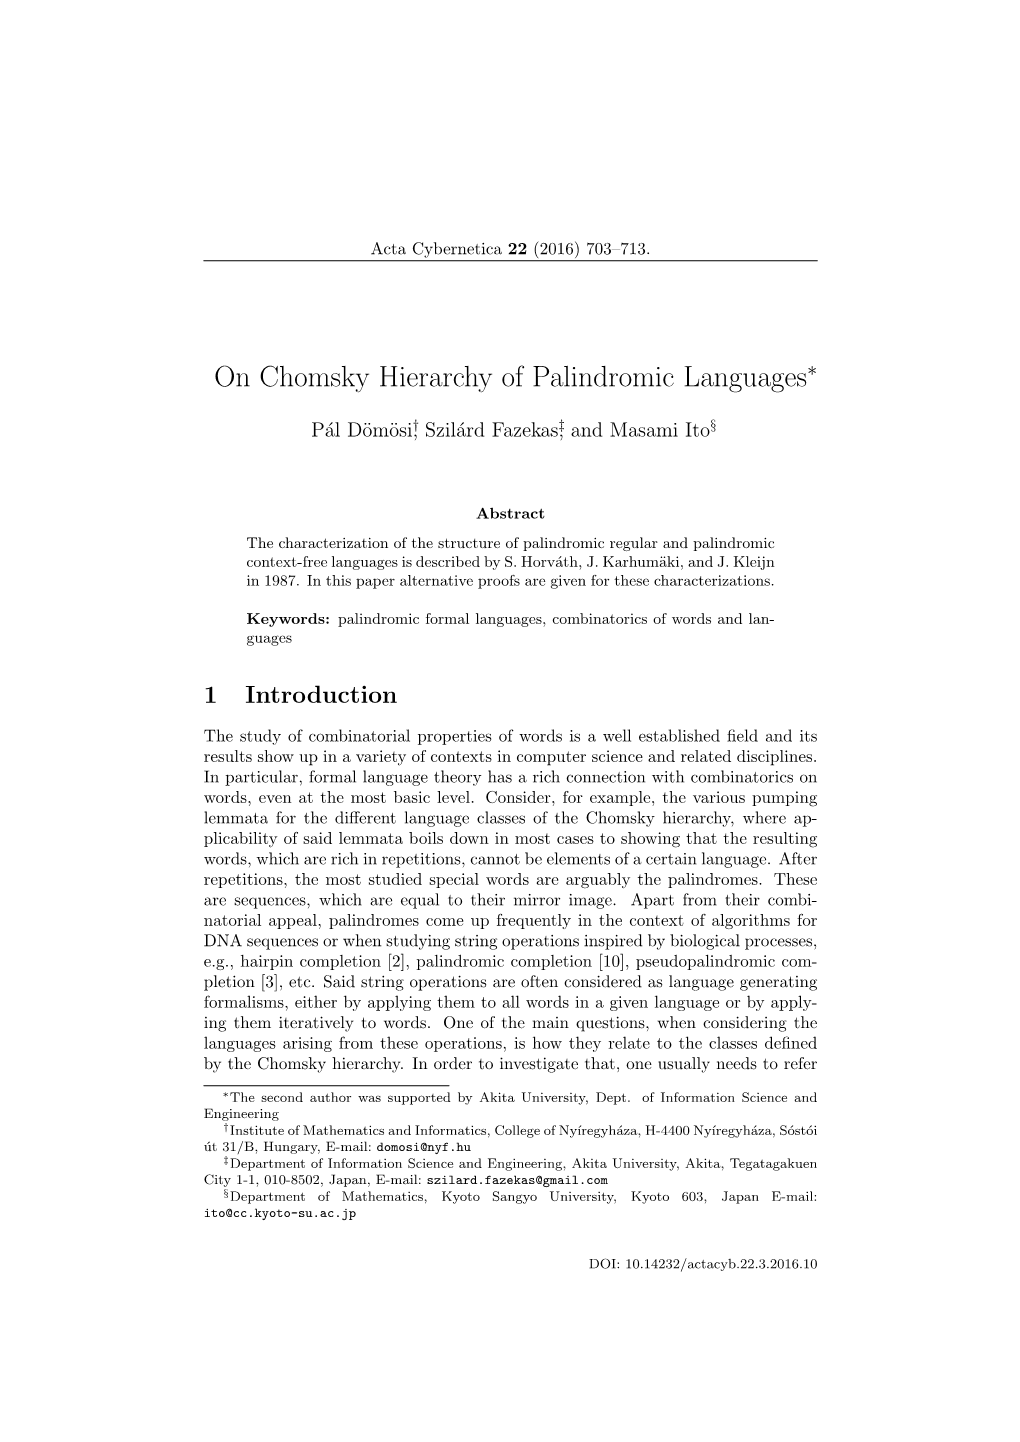 On Chomsky Hierarchy of Palindromic Languages∗